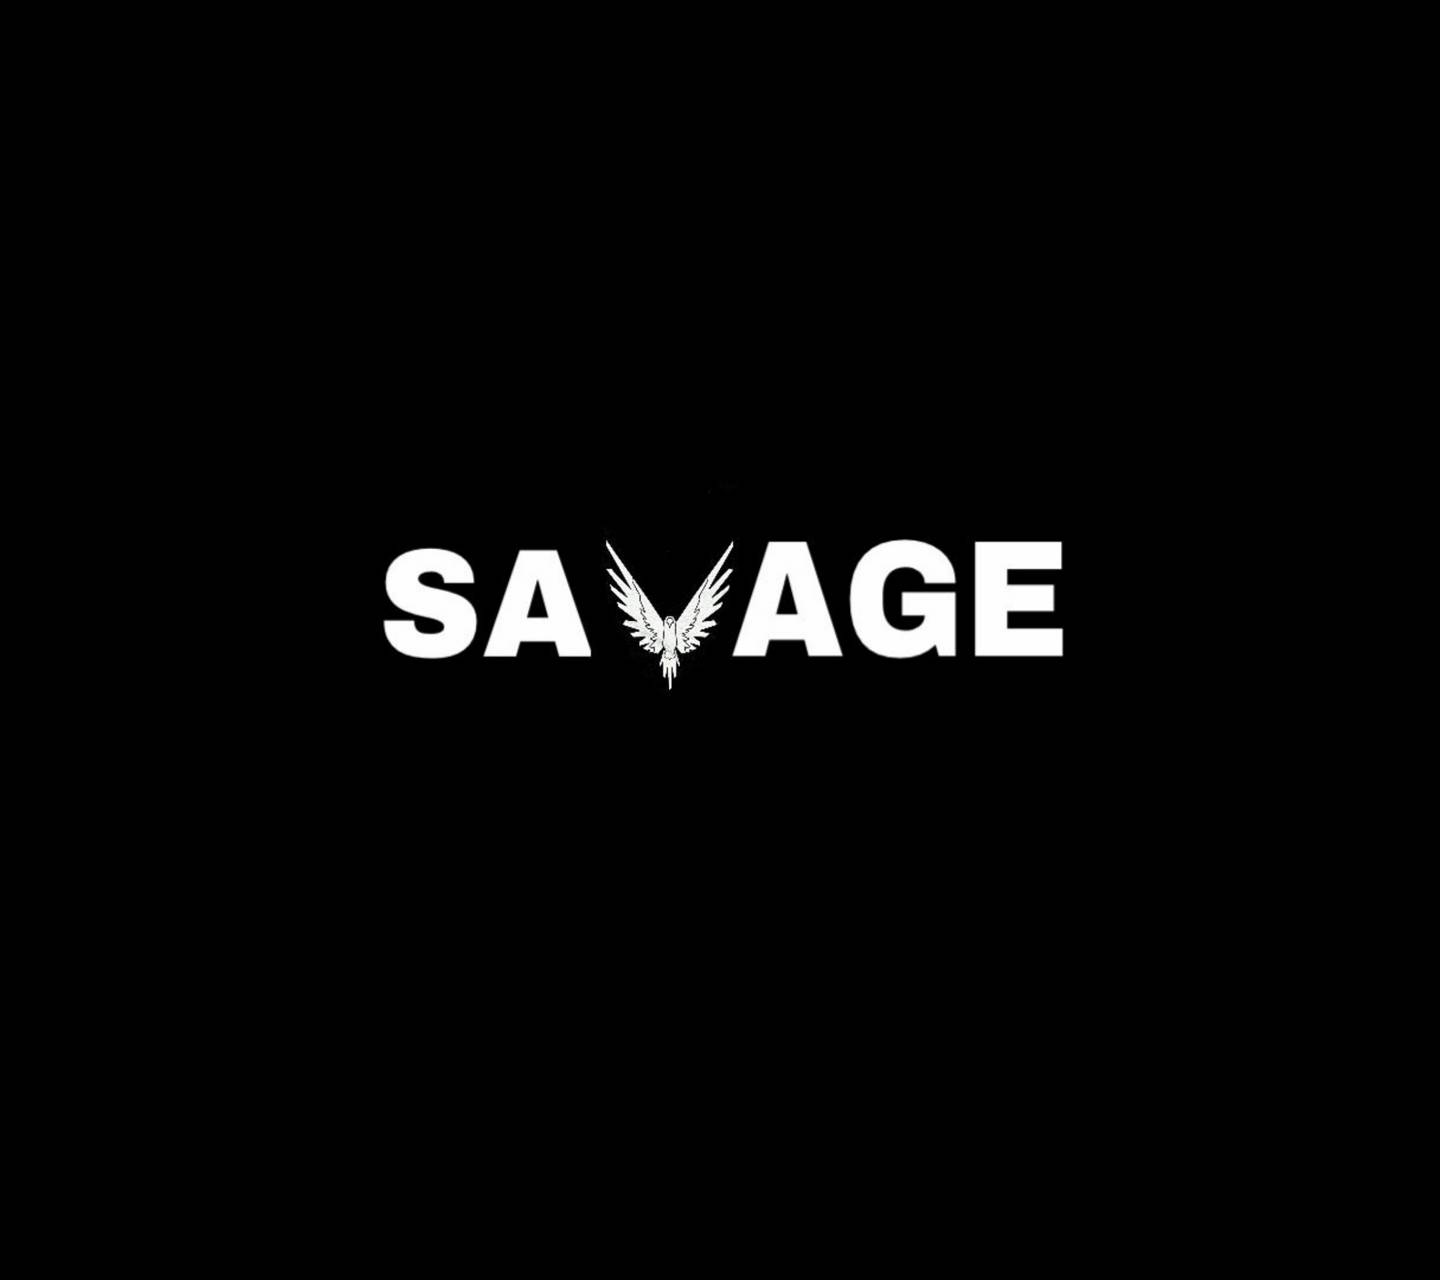 Savages Logo - The Savages Wallpapers - Wallpaper Cave